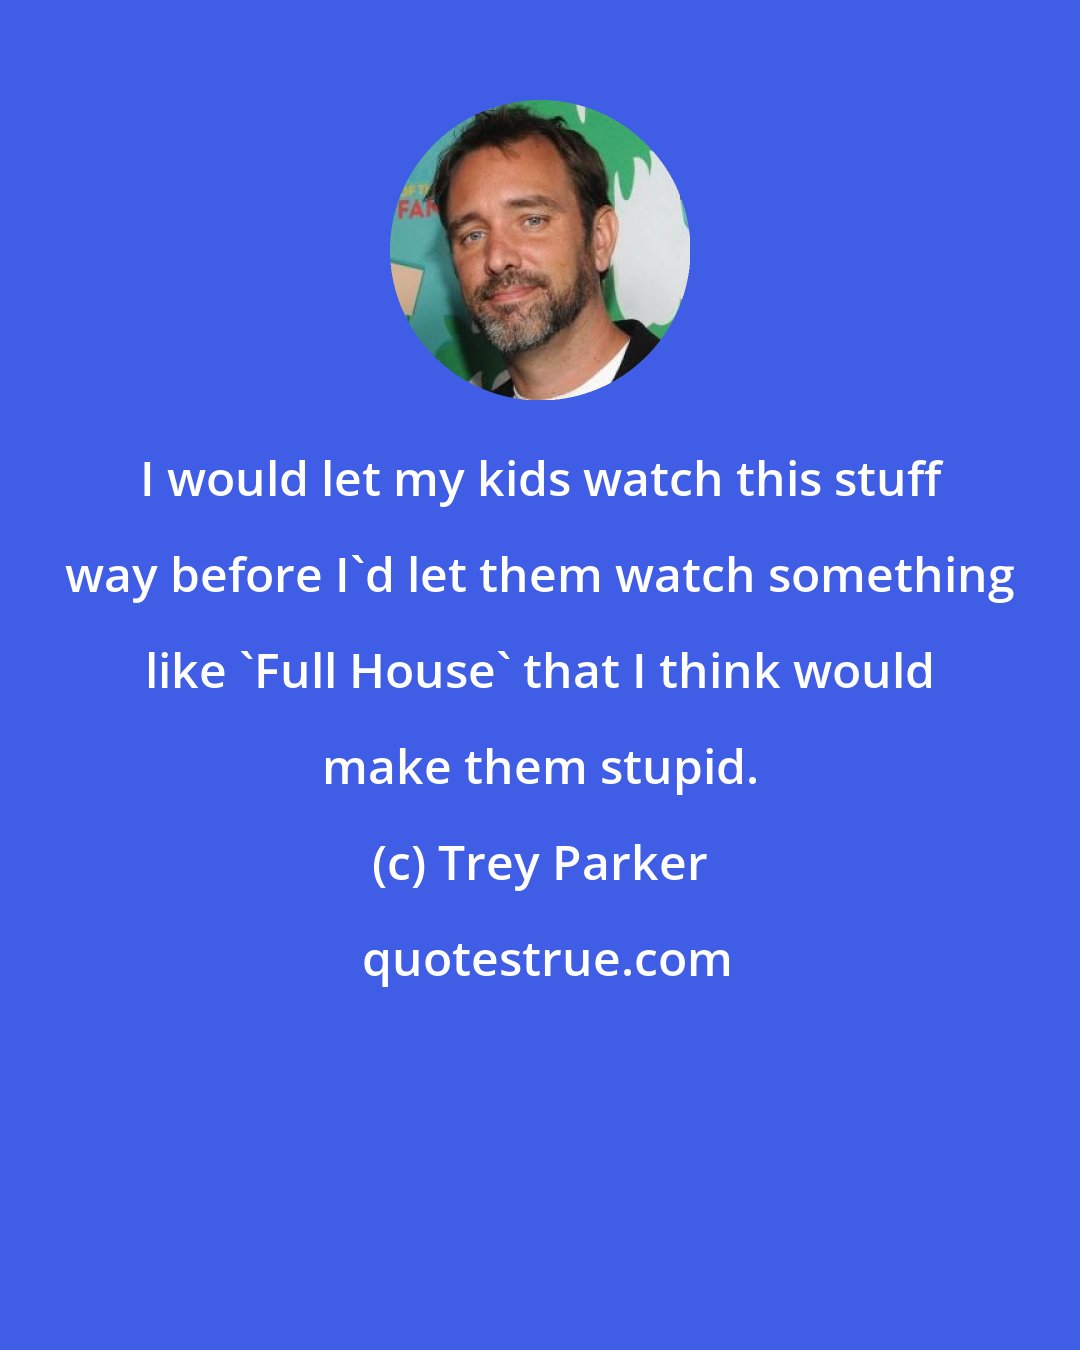 Trey Parker: I would let my kids watch this stuff way before I'd let them watch something like 'Full House' that I think would make them stupid.